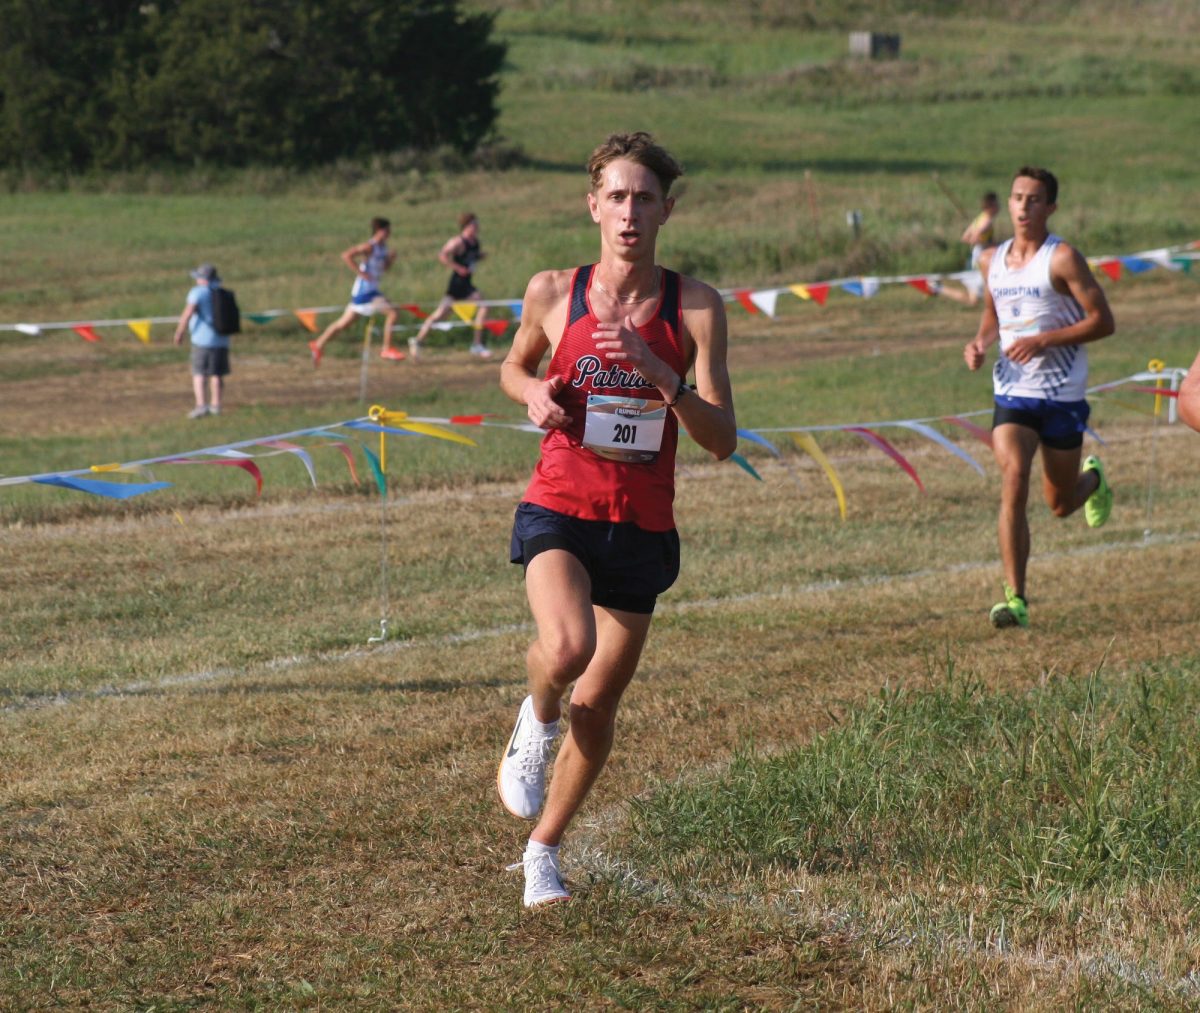 Senior Dalton Heller powers through race at Platte River Rumble at Mahoney State Park. Heller got 5th place, finishing with a time of 15:22:24.